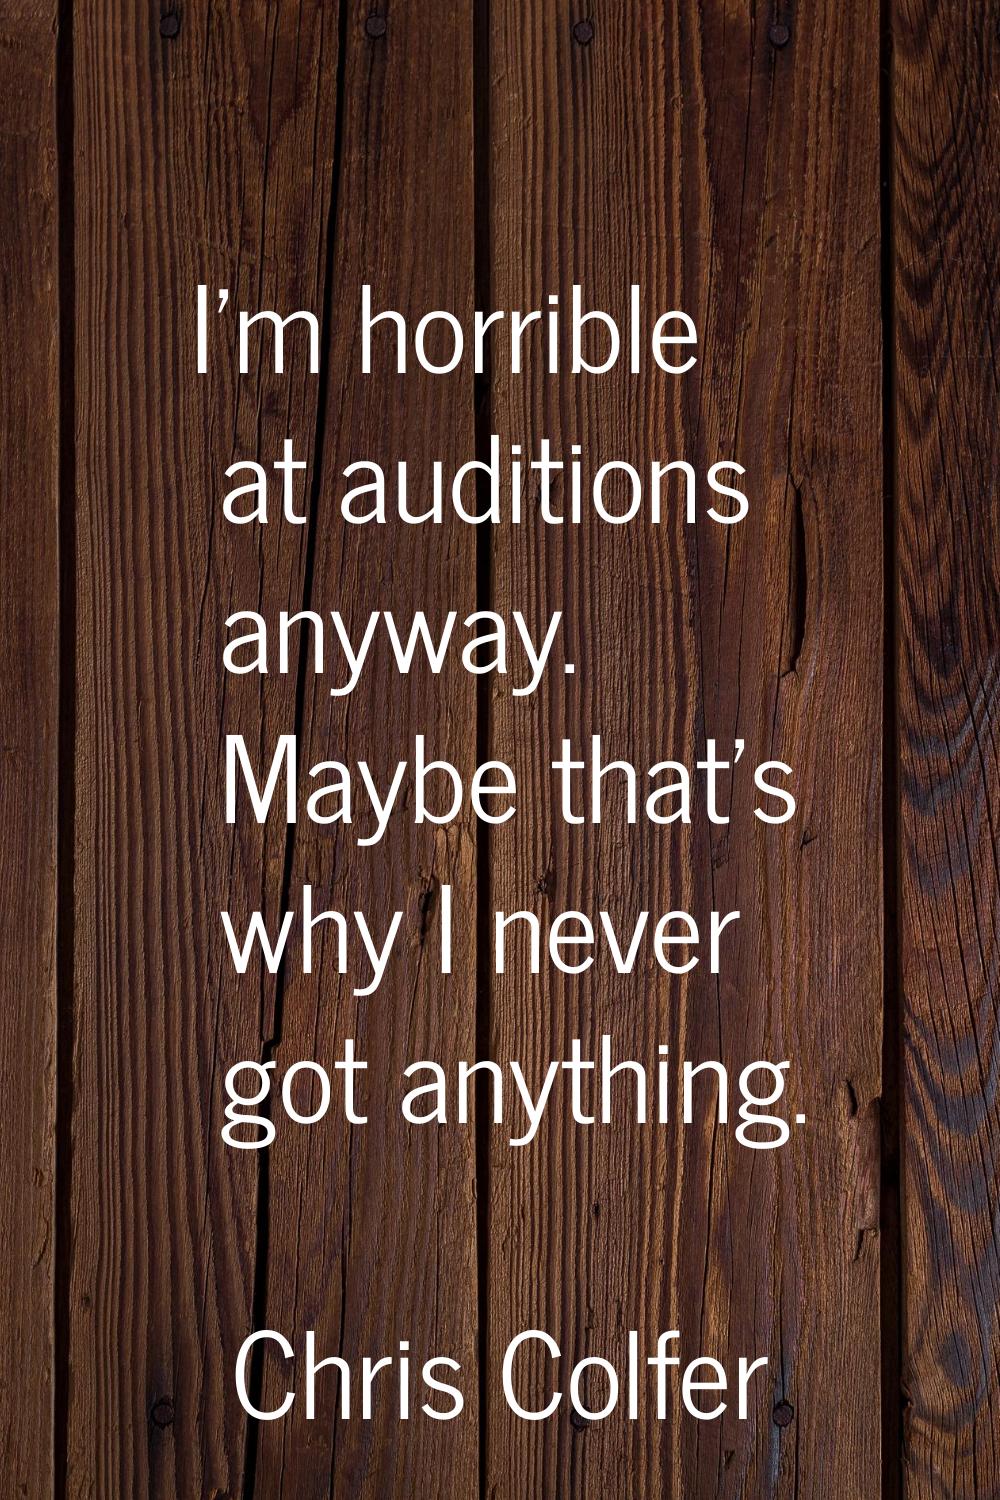 I'm horrible at auditions anyway. Maybe that's why I never got anything.